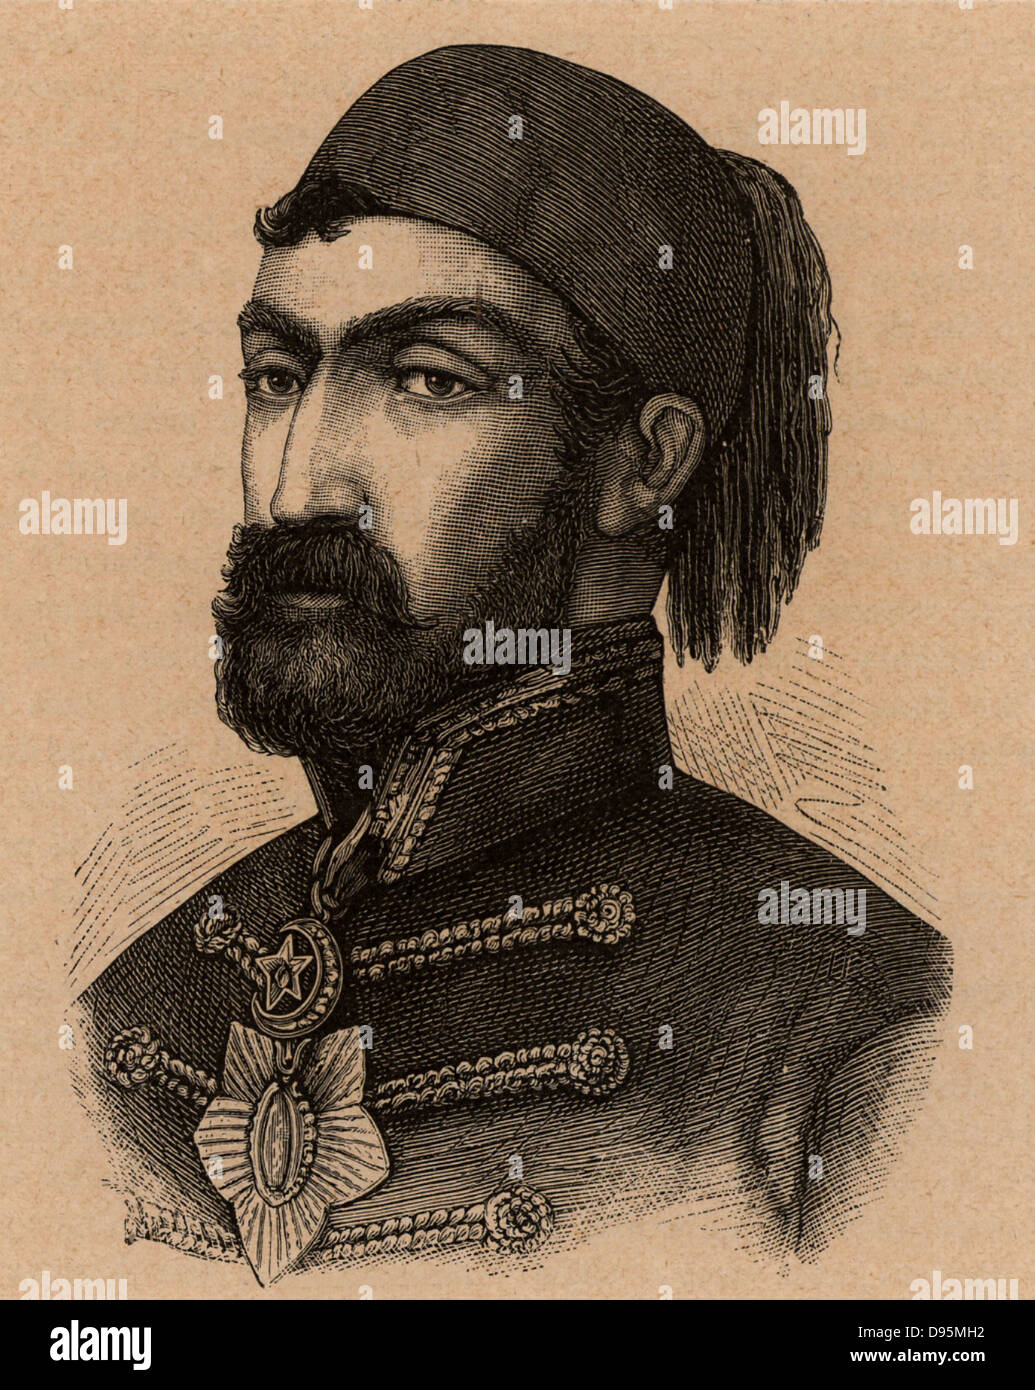 Omar Pasha ( born Michael Latas 1806-1871) Croatian-born Ottoman general. Commanded the Turkish forces during Crimean (Russo-Turkish) War 1853-1856. Engraving. Stock Photo